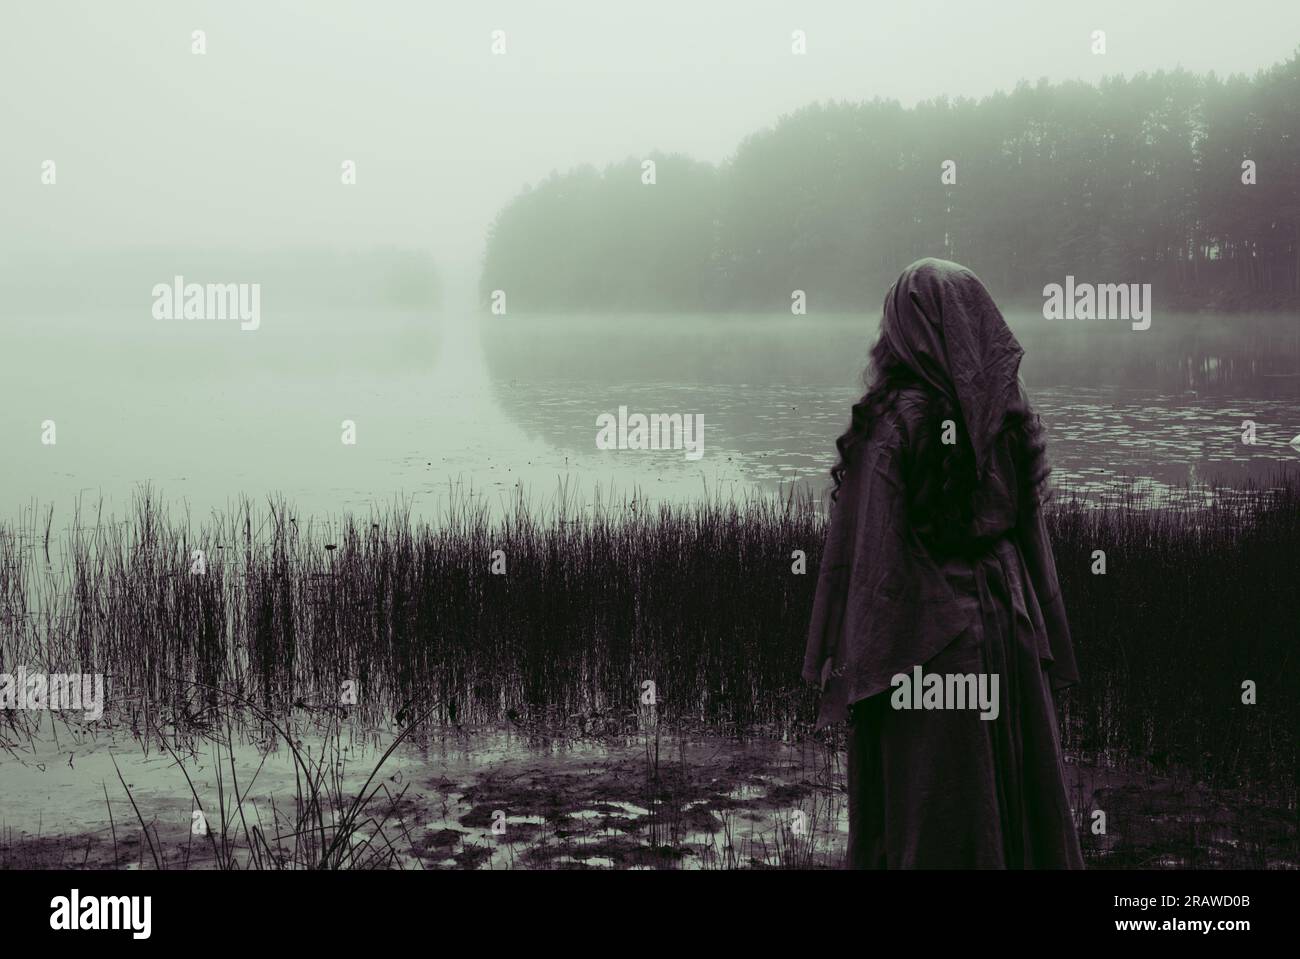 Medieval woman looking out over foggy lake. Mood of photo evokes old norse or pagan goddess worship. Stock Photo